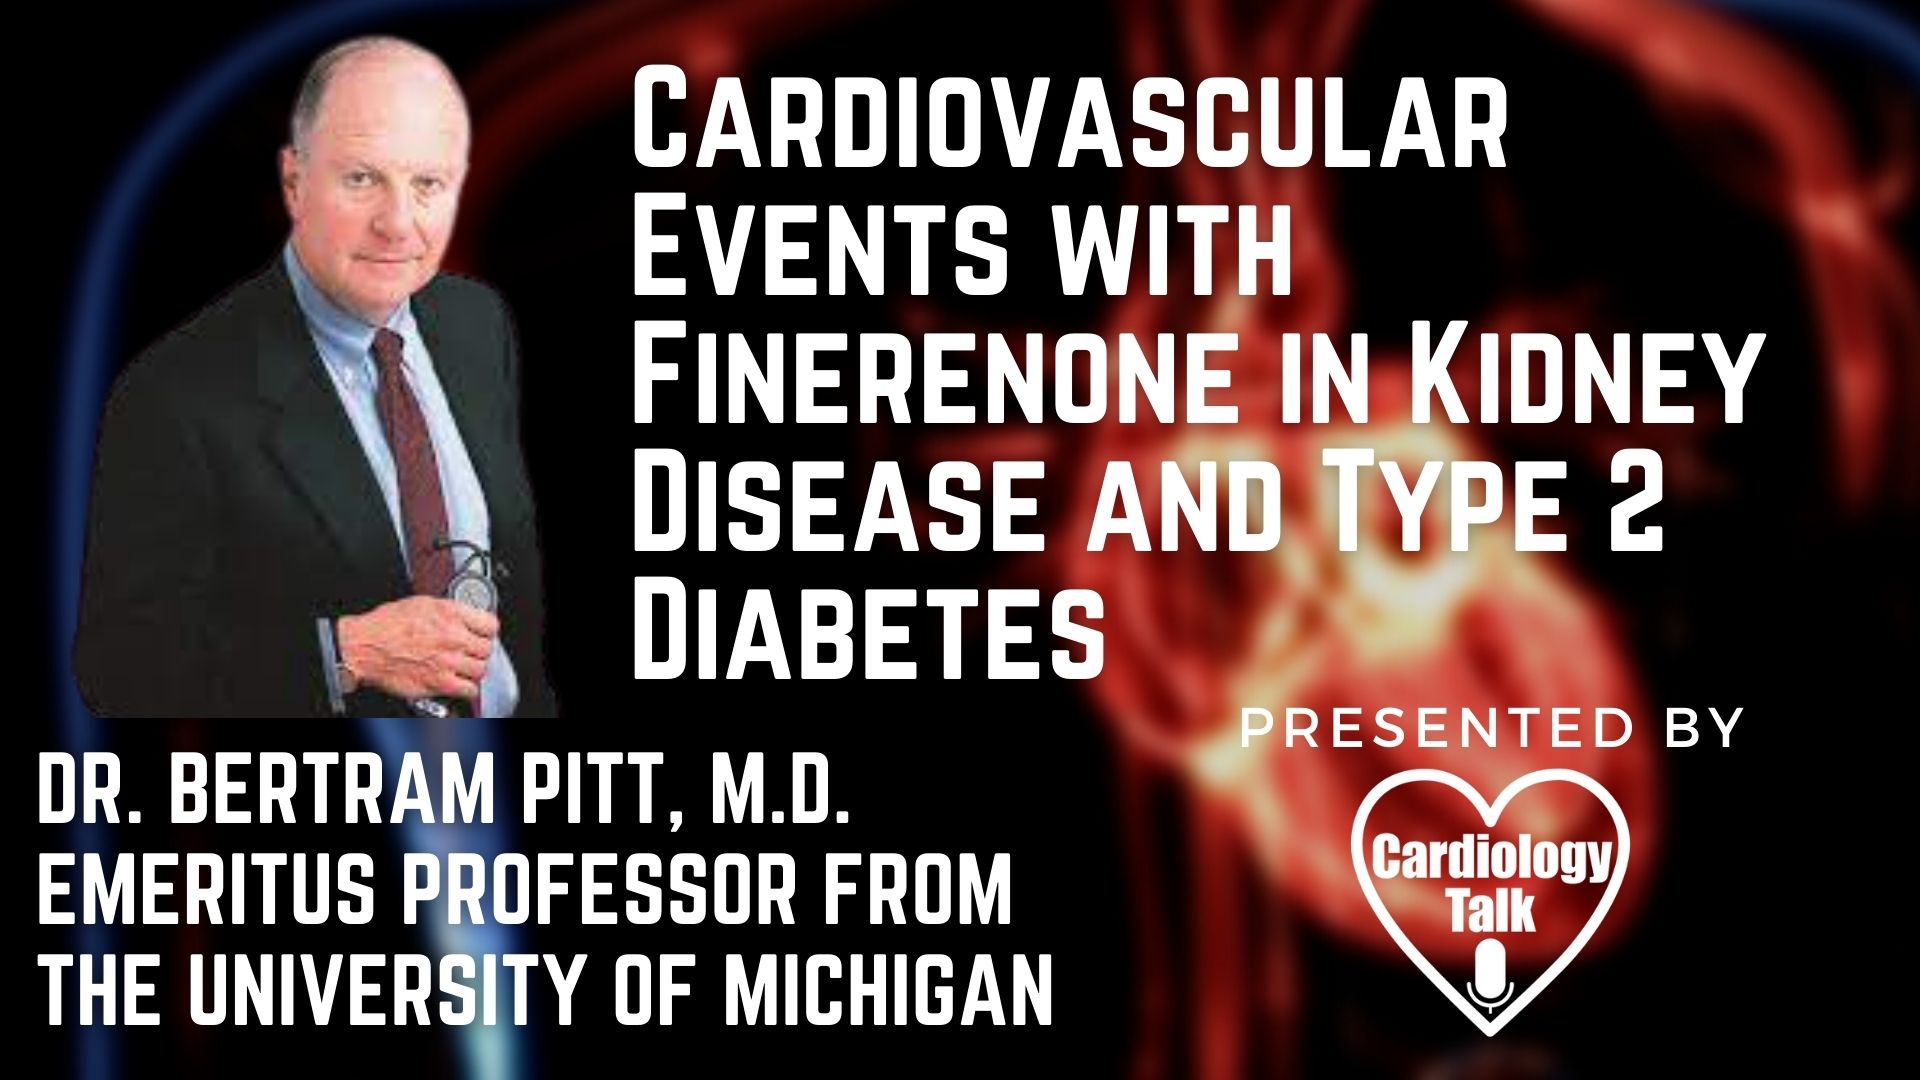 Bertram Pitt, M.D. - @UMich @UMichCardiology #CardiovascularEvents #Cardiology #Research Cardiovascular Events with Finerenone in Kidney Disease and Type 2 Diabetes